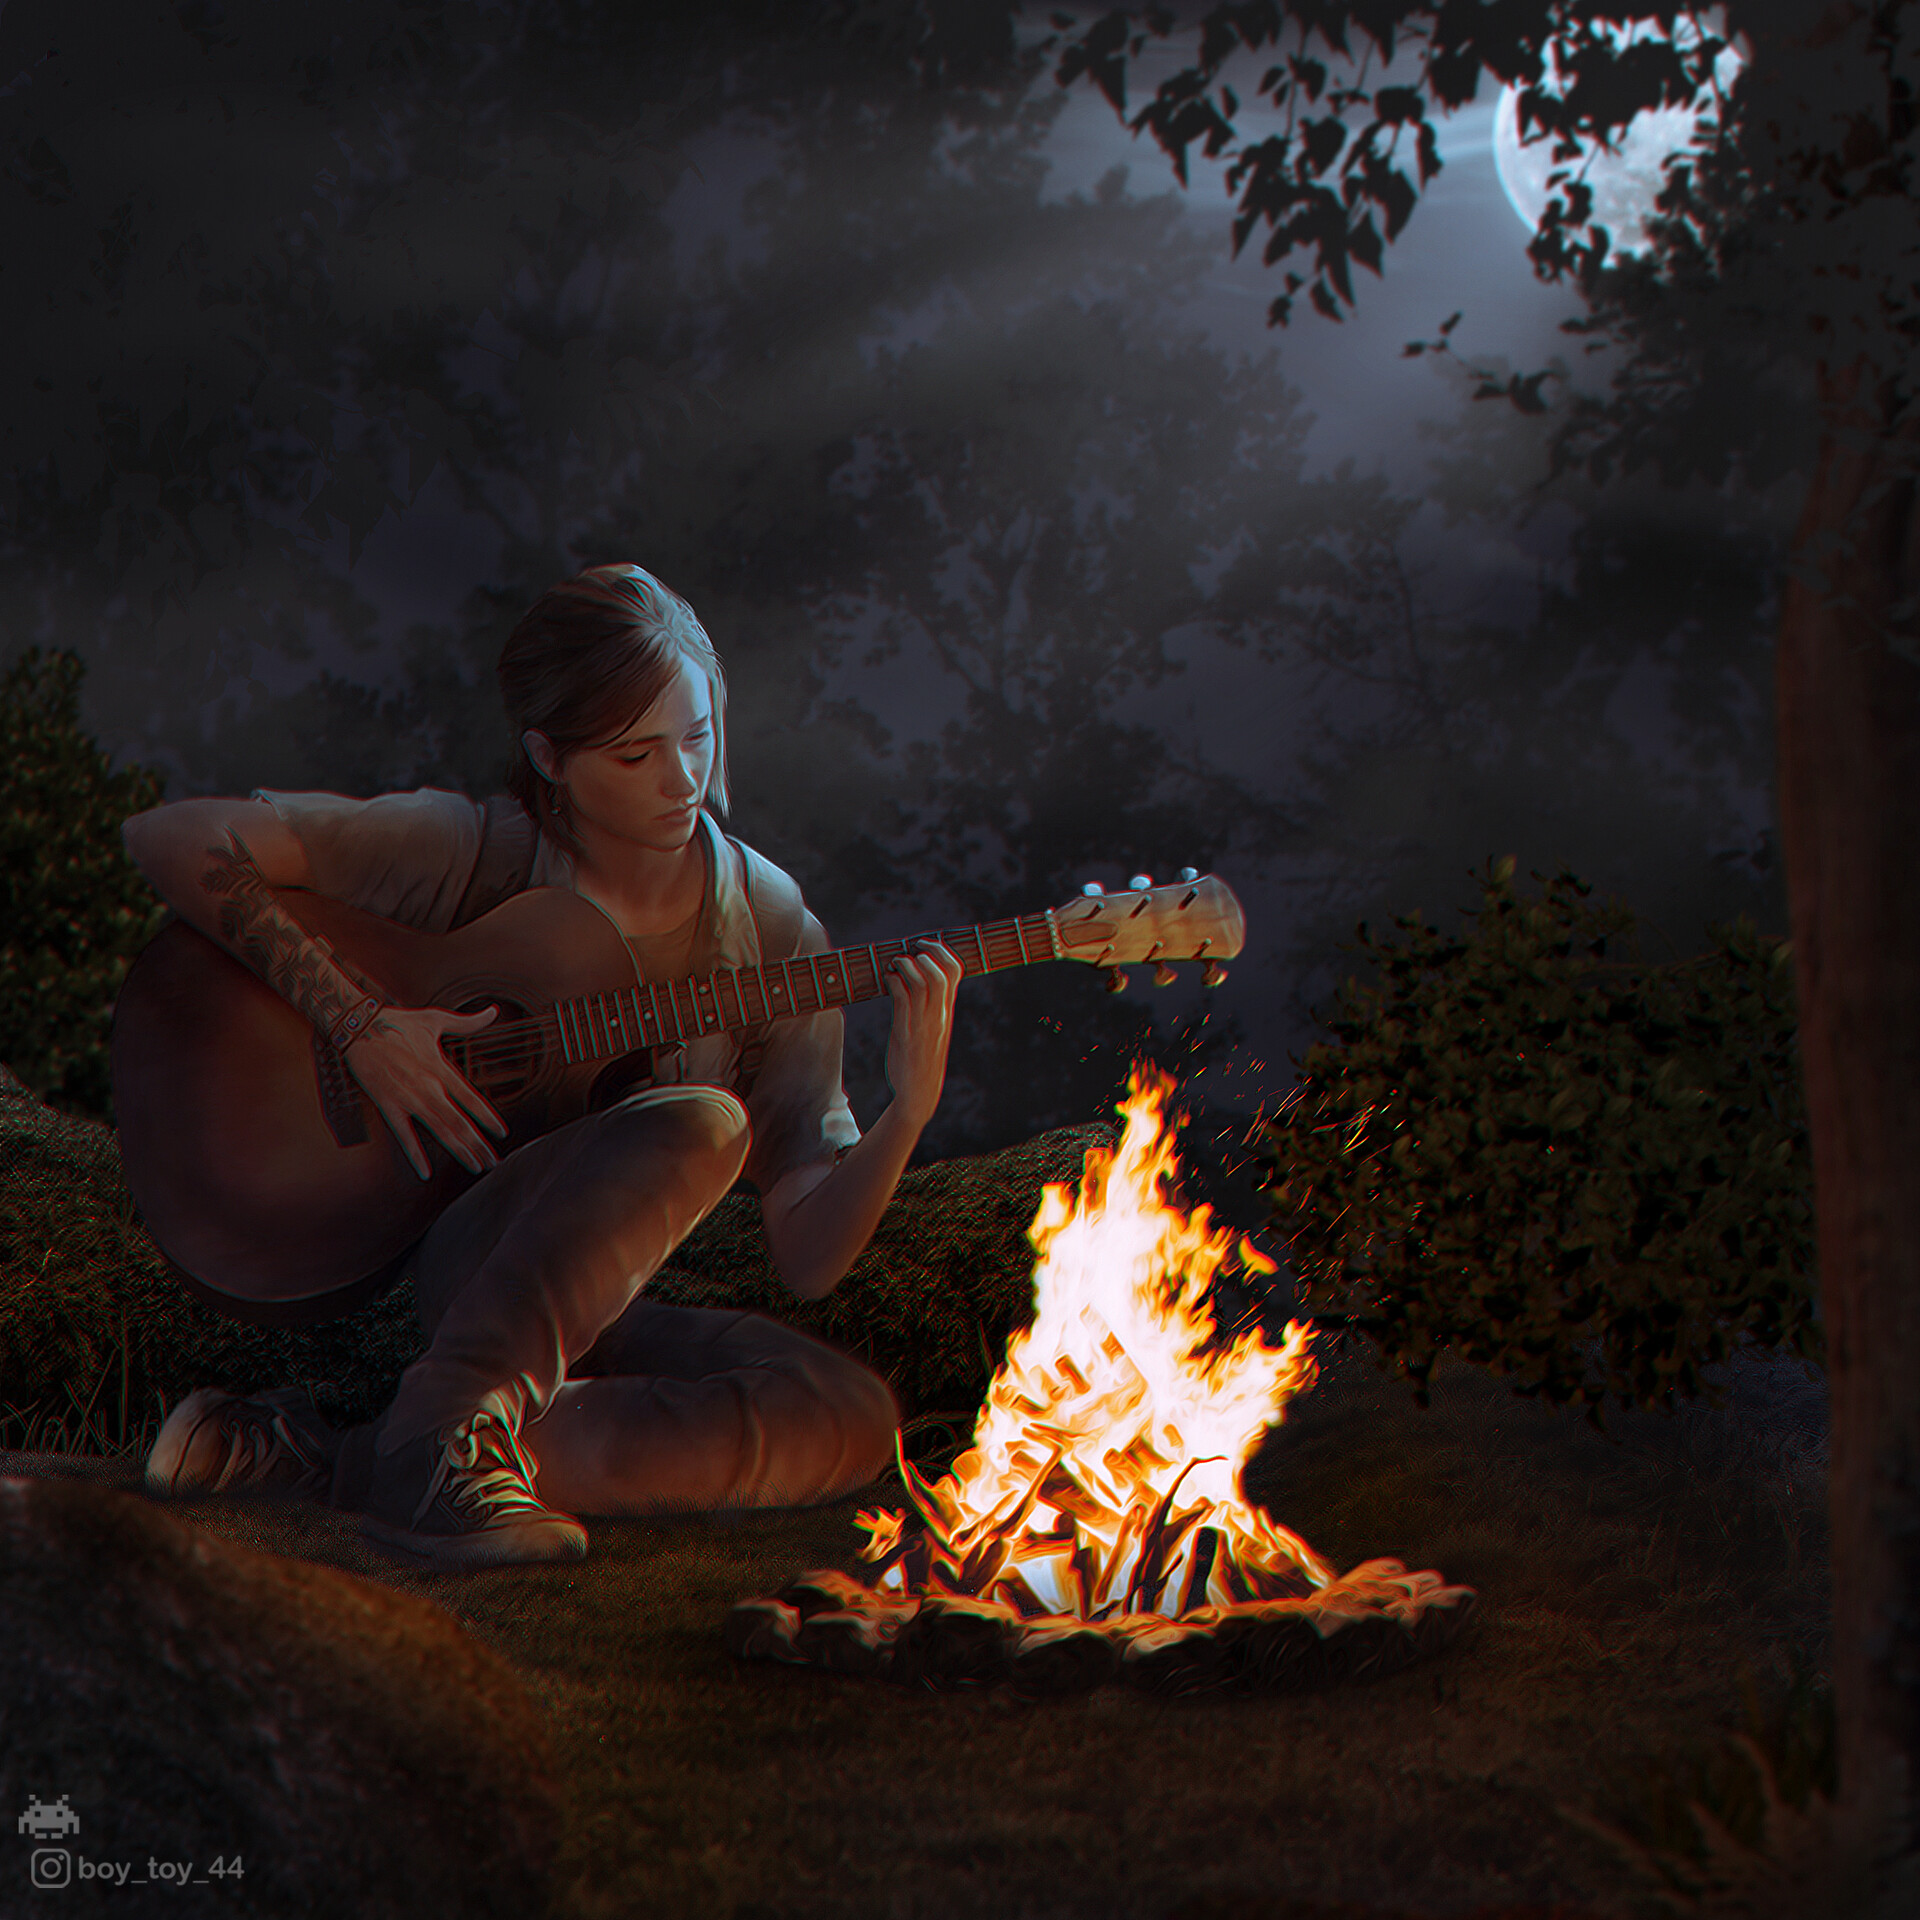 Ellie-The Last of Us (Photomanipulation/wallpaper) by